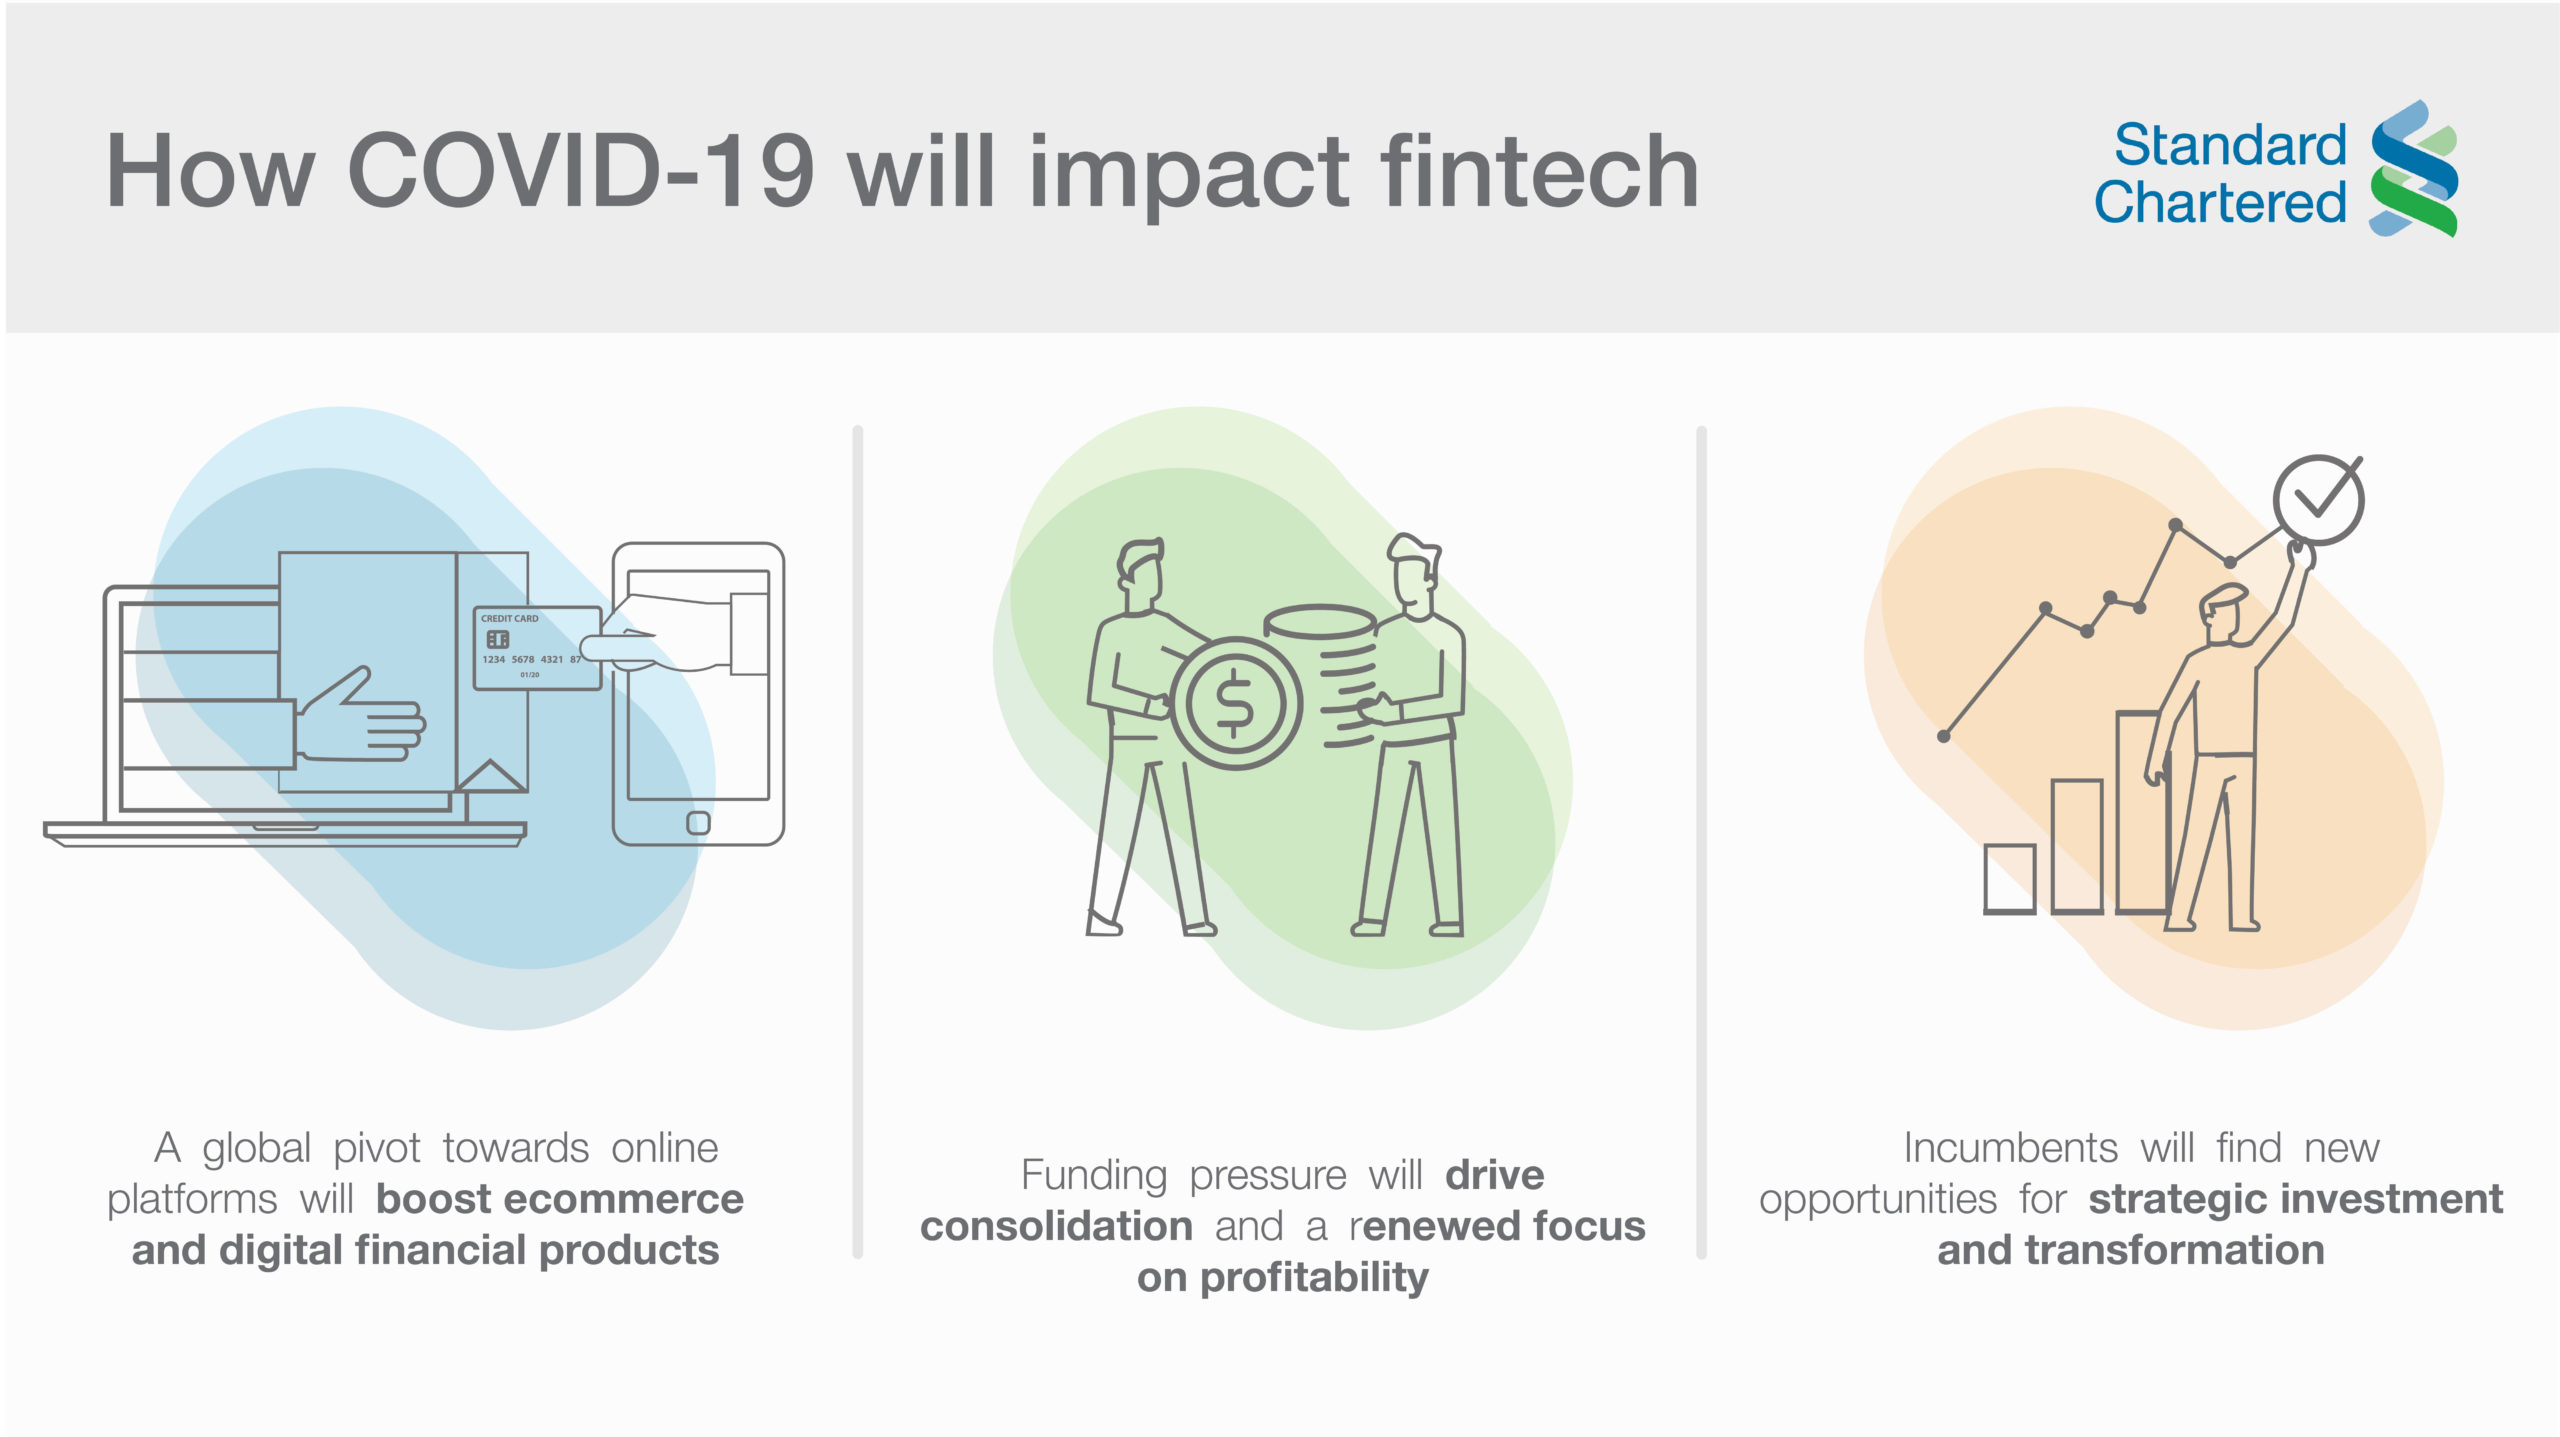 Infographic on how COVID-19 will impact fintech